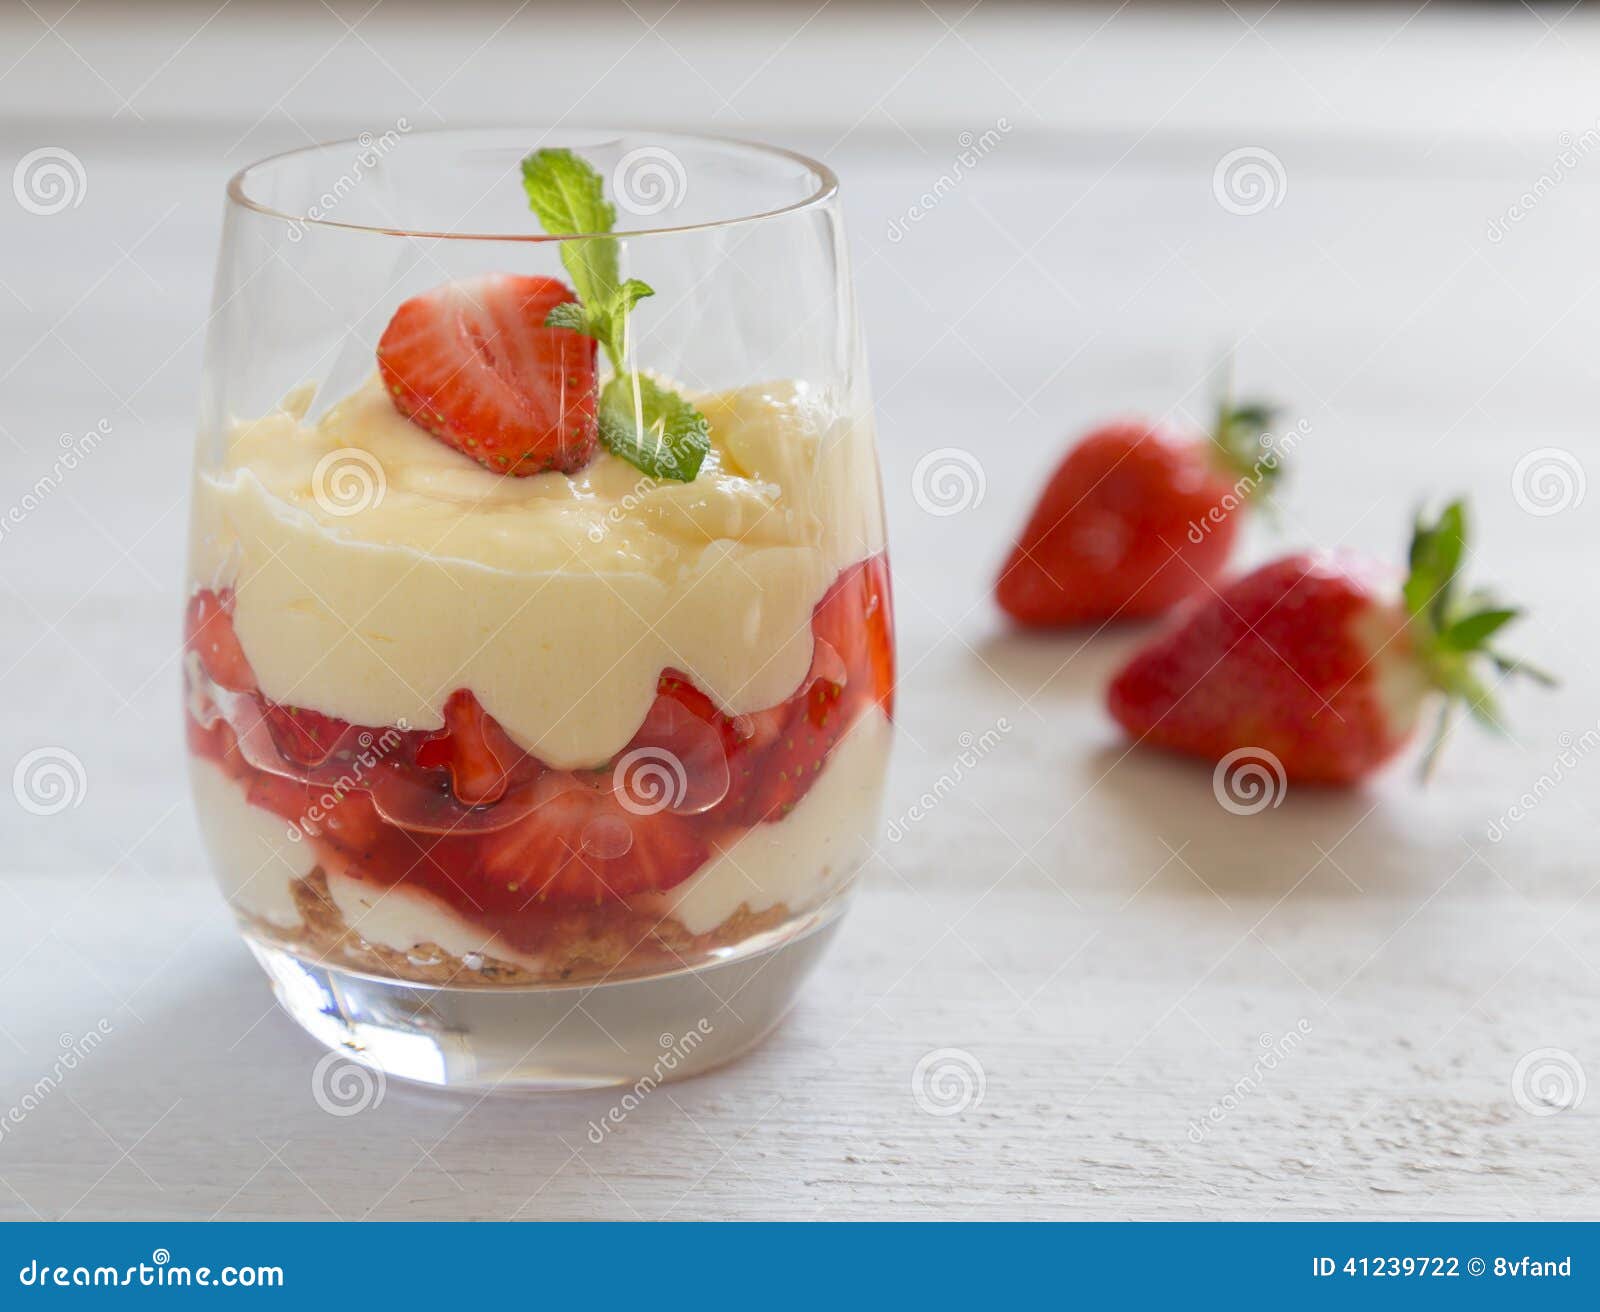 vanilla pudding with tipsy strawberries on wood